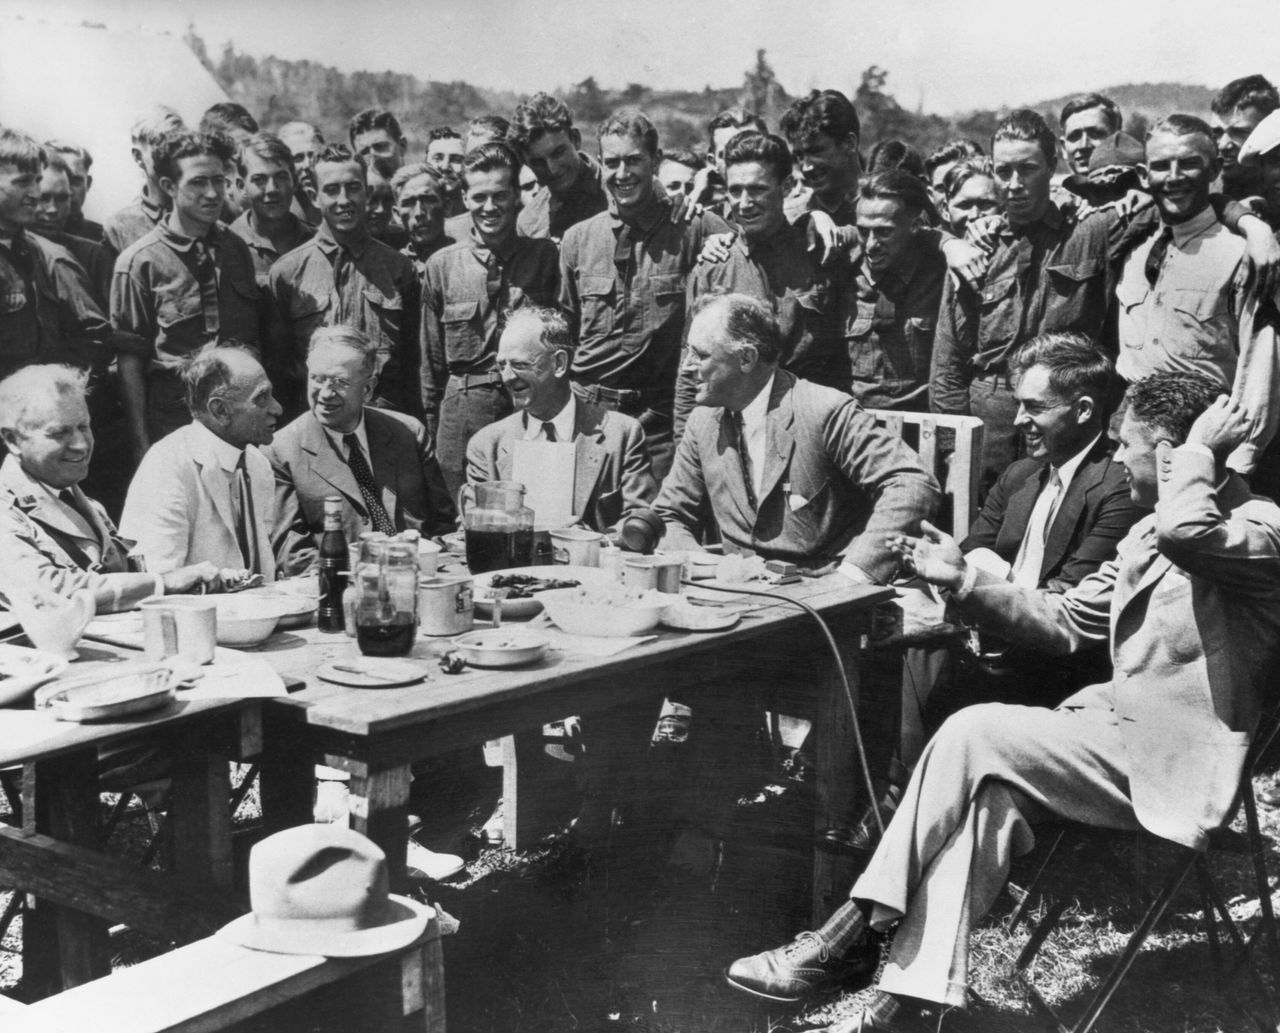 President Franklin Delano Roosevelt visits the Civilian Conservation Corps (CCC) camp in Big Meadows in the Shenandoah Valley, Virginia.